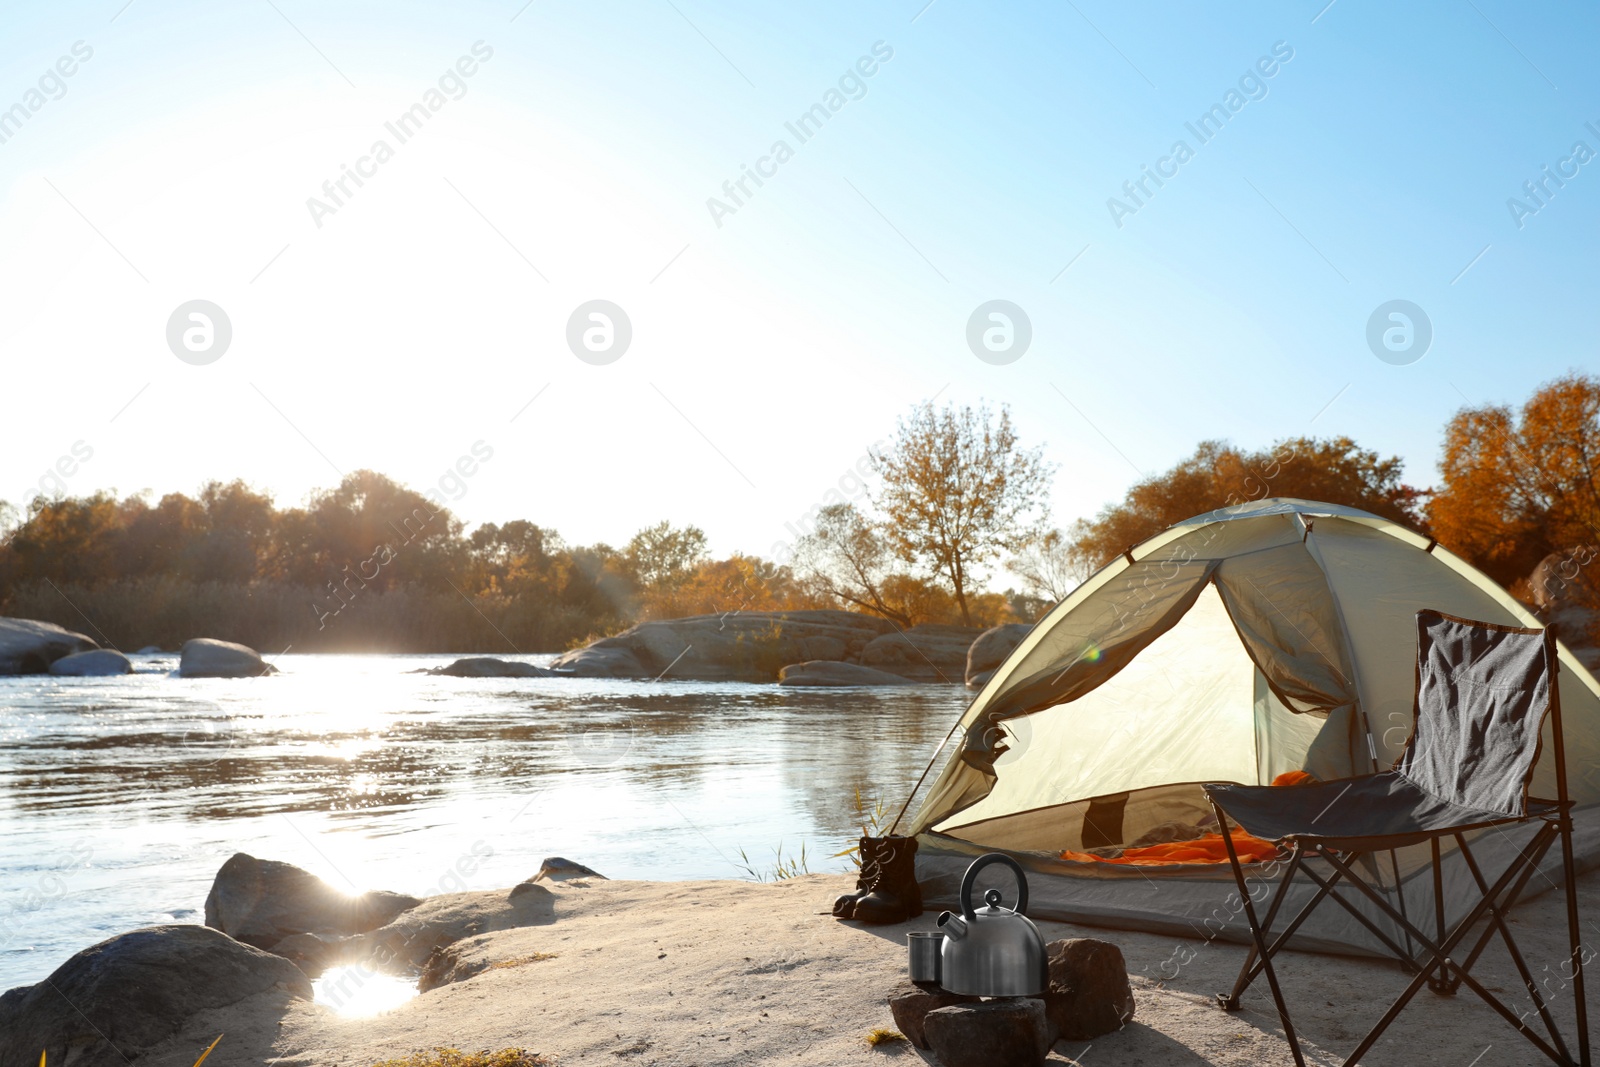 Photo of Camping equipment near tent with sleeping bag outdoors